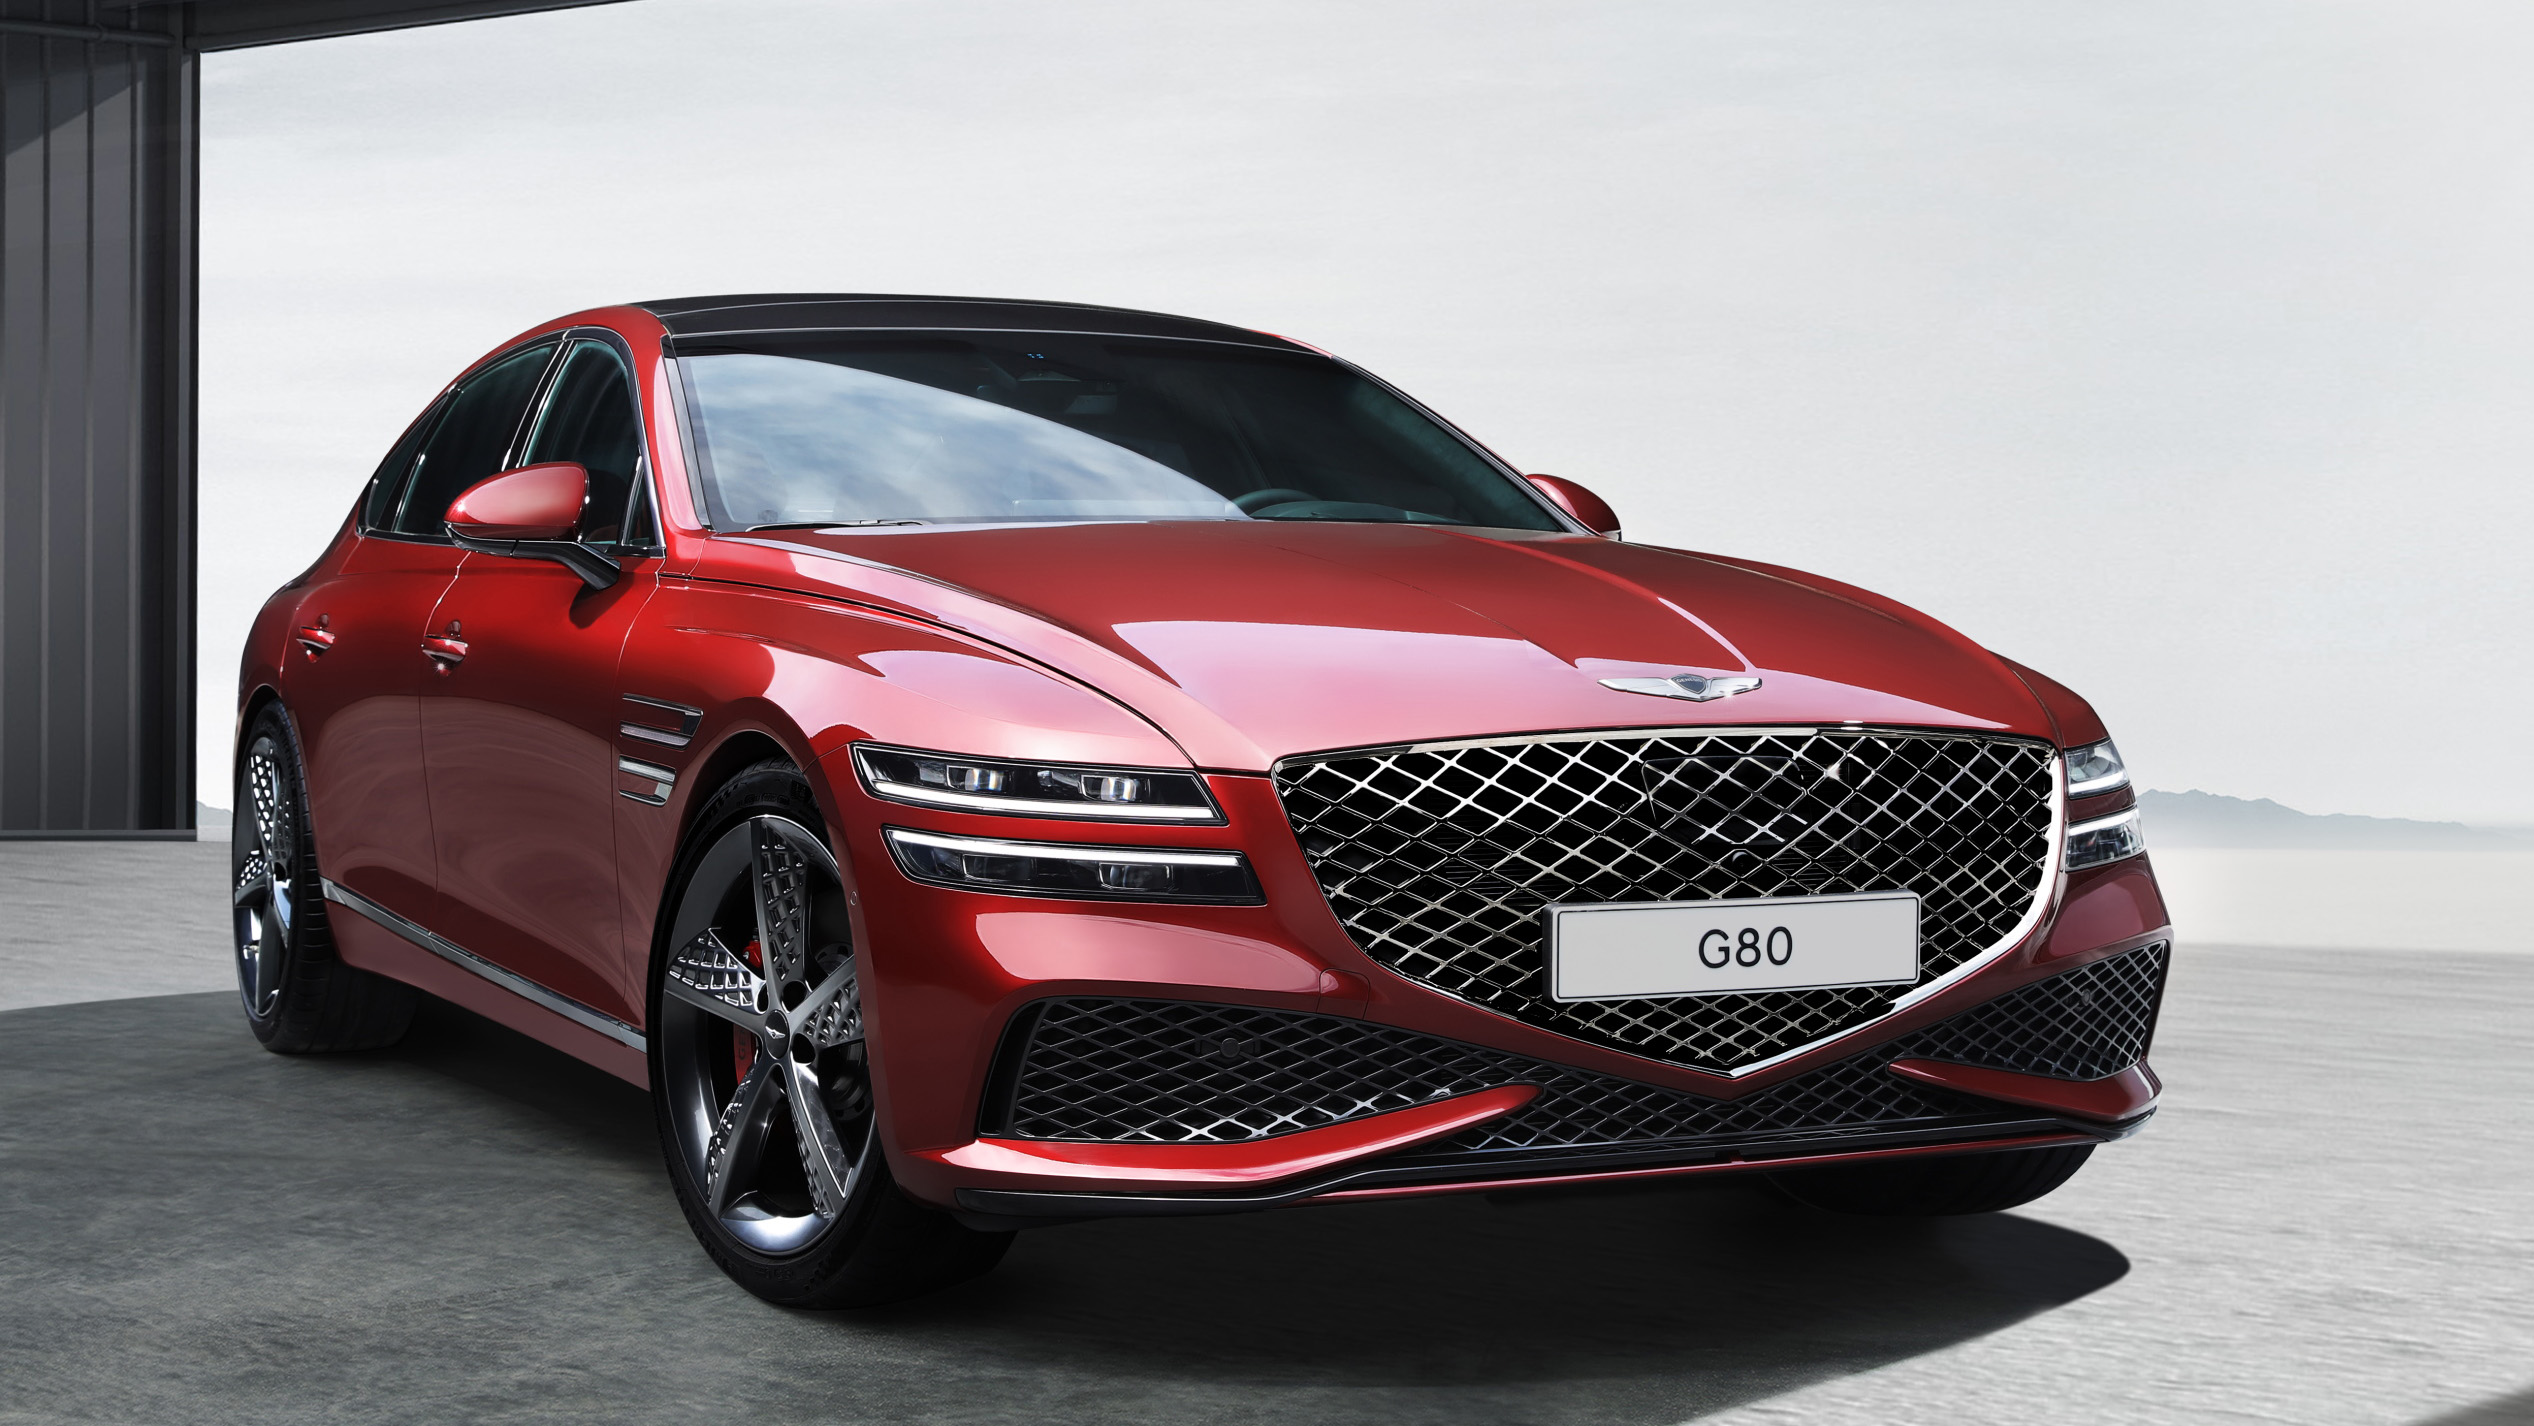 2022-genesis-g80-sport-model-shown-for-the-first-time-autoblog